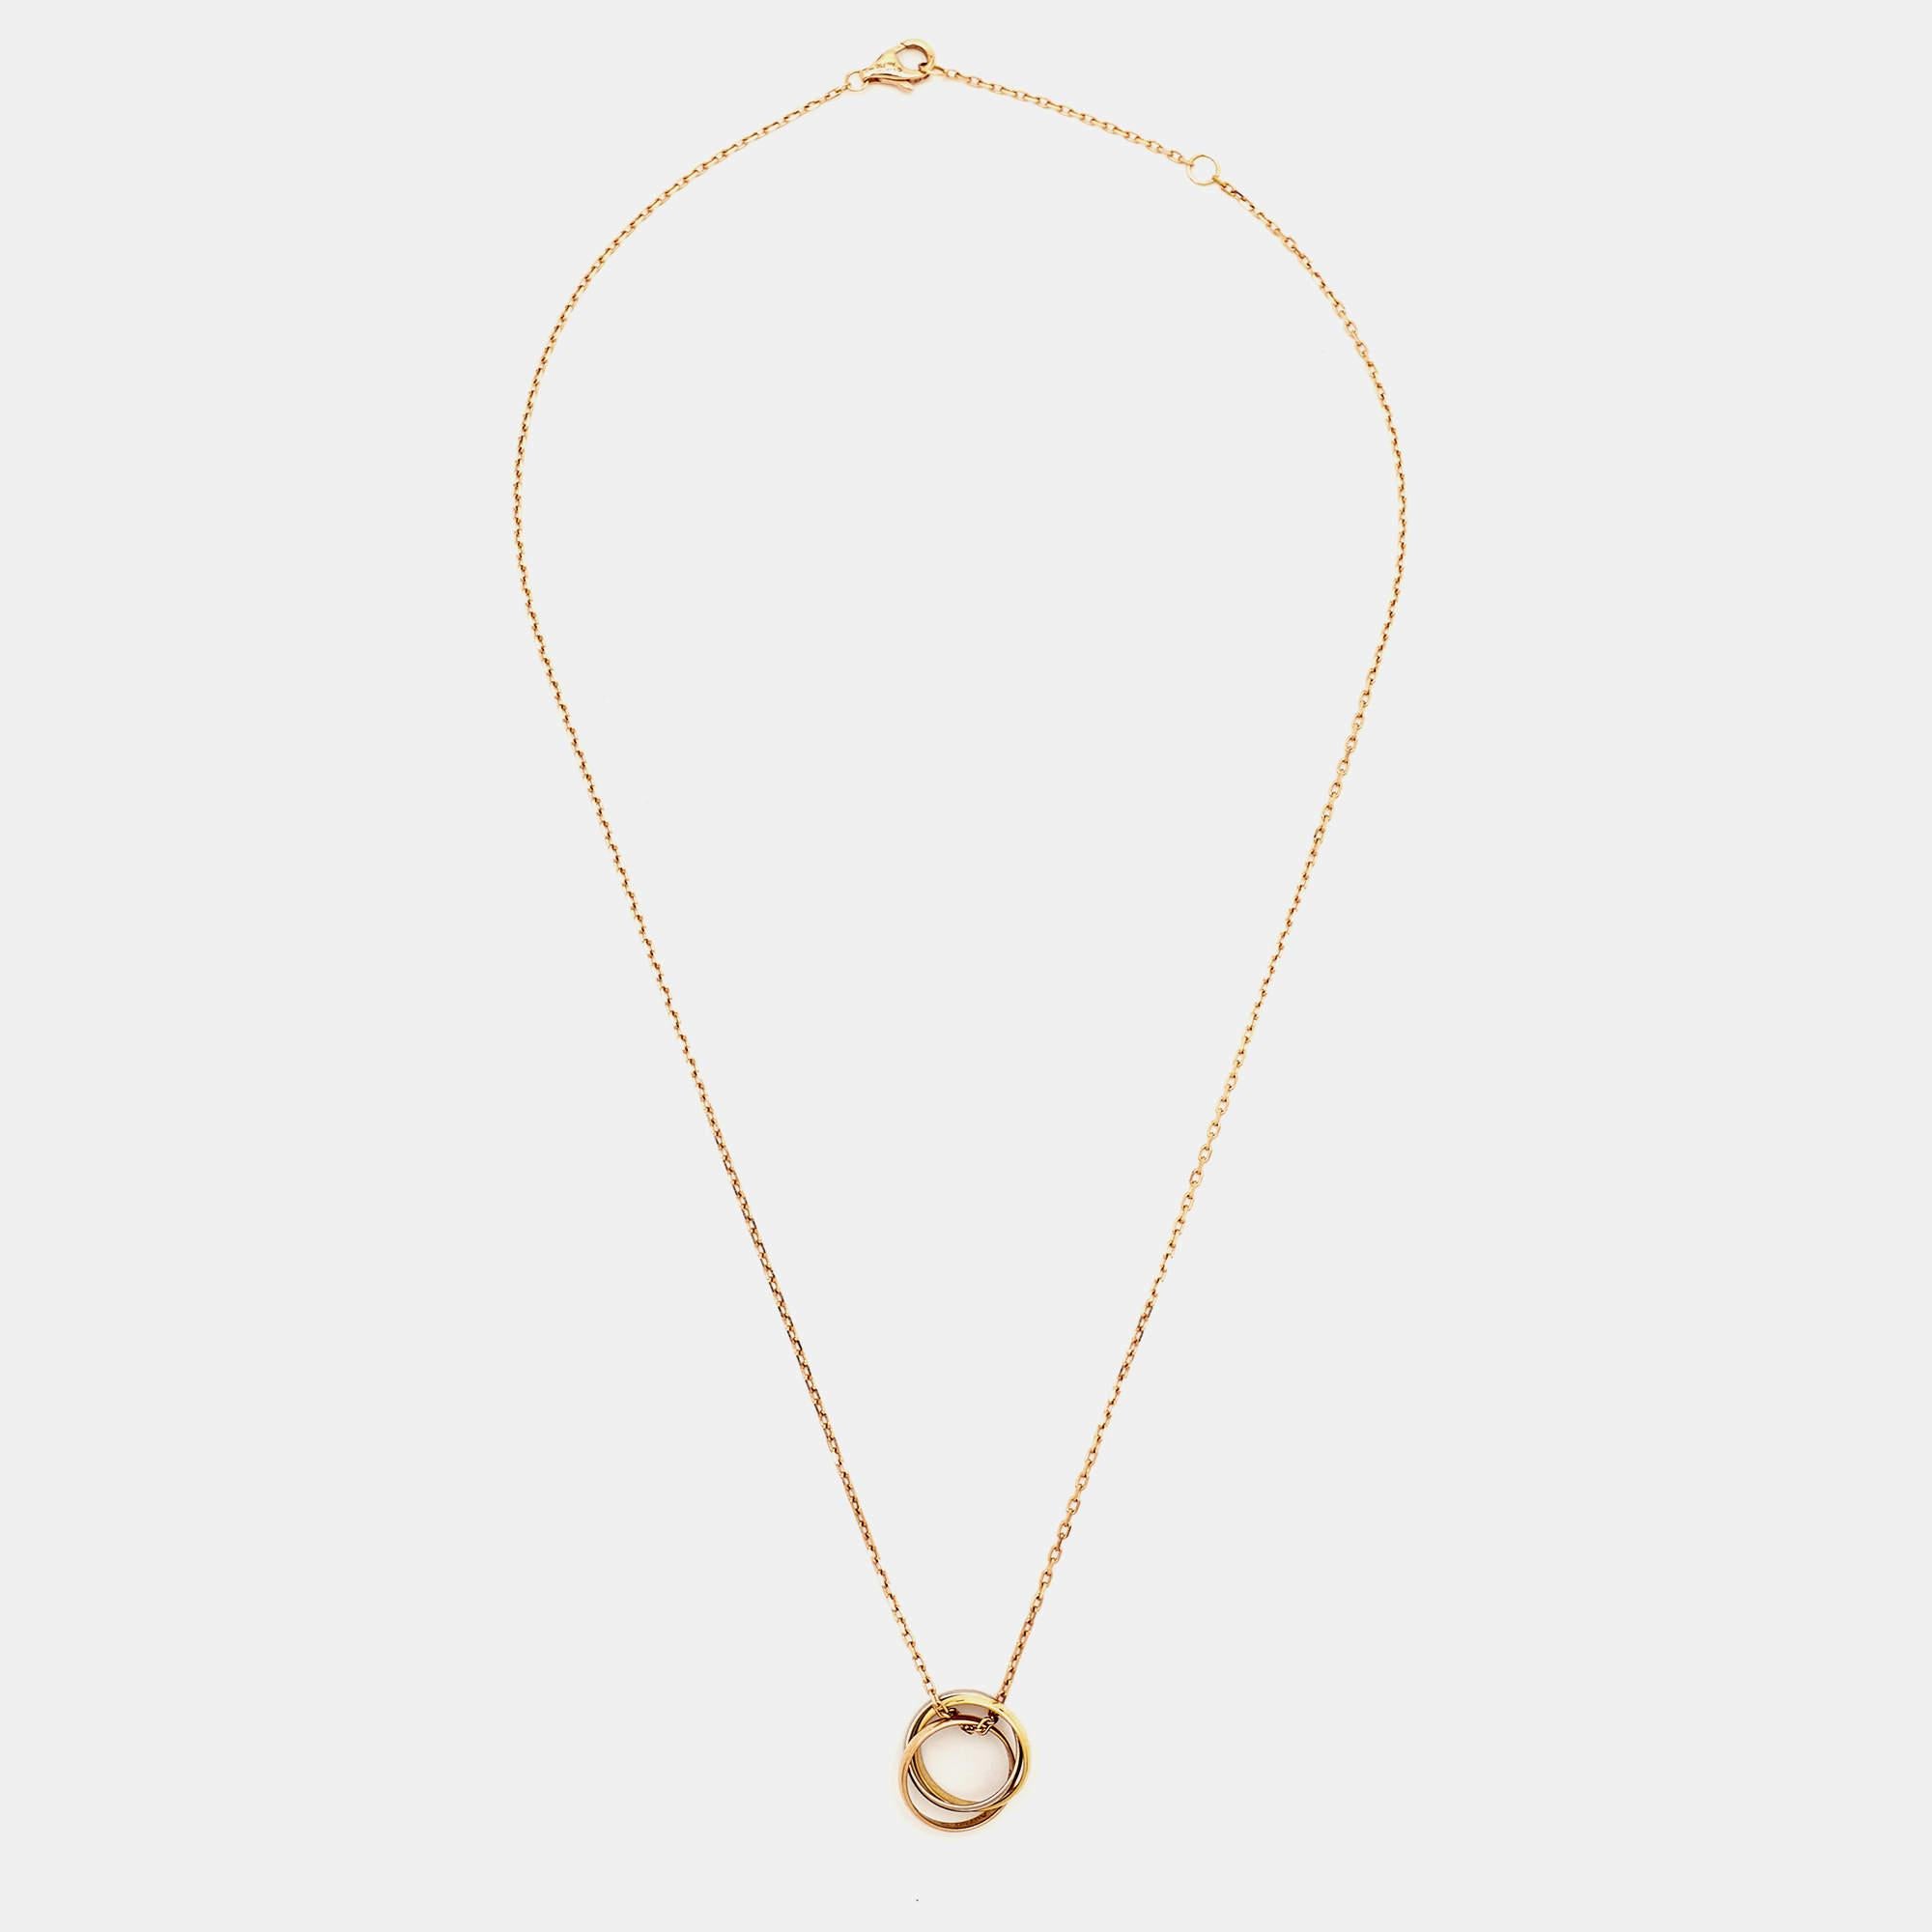 The Cartier necklace is a luxurious piece of jewelry featuring three intertwined rings made of 18k white, yellow, and rose gold. This iconic design symbolizes love, fidelity, and friendship, creating an elegant and timeless accessory.

